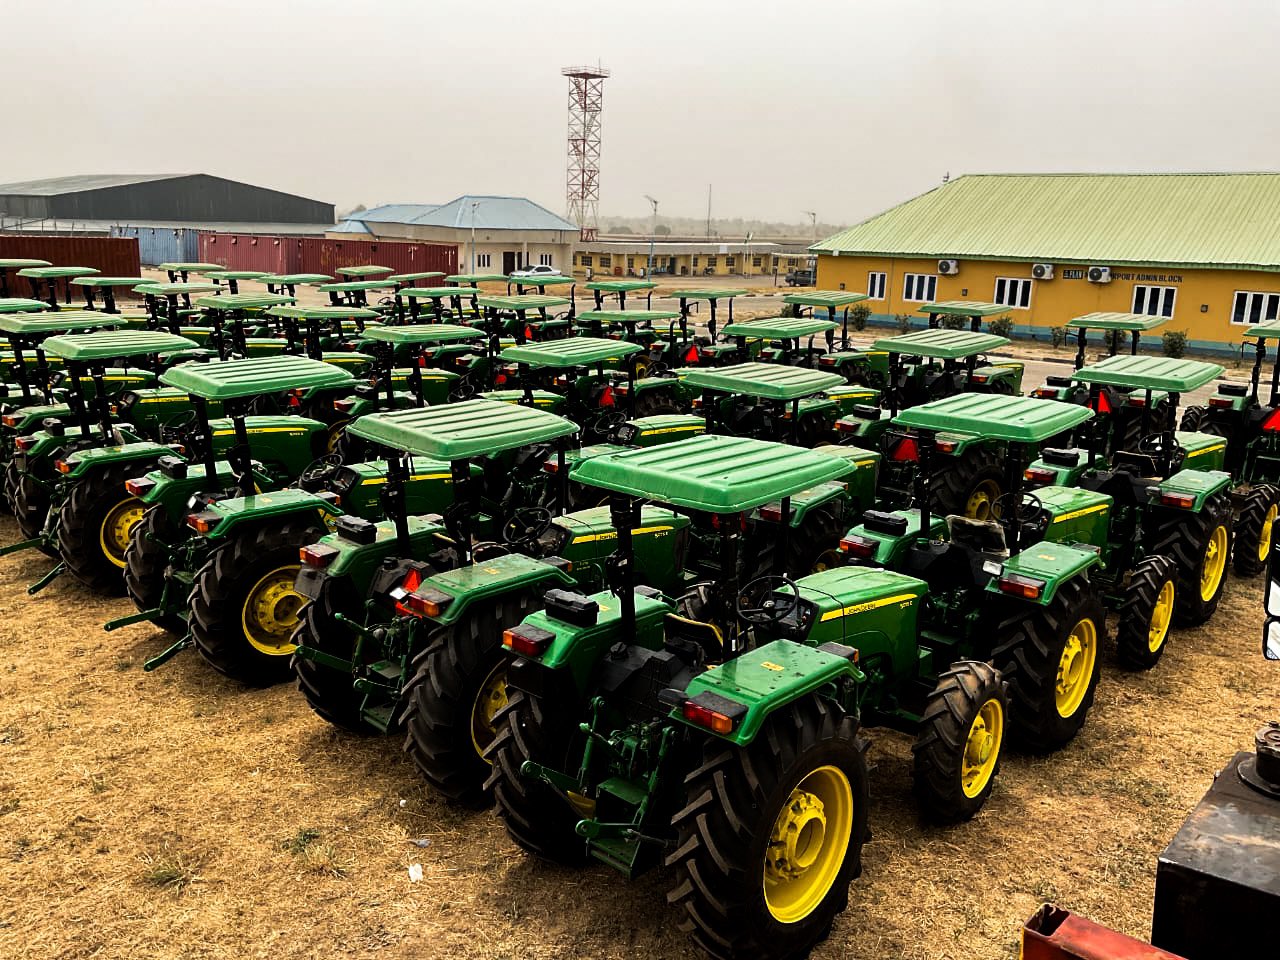 Bago takes delivery of 300 tractors to boost food production in Niger